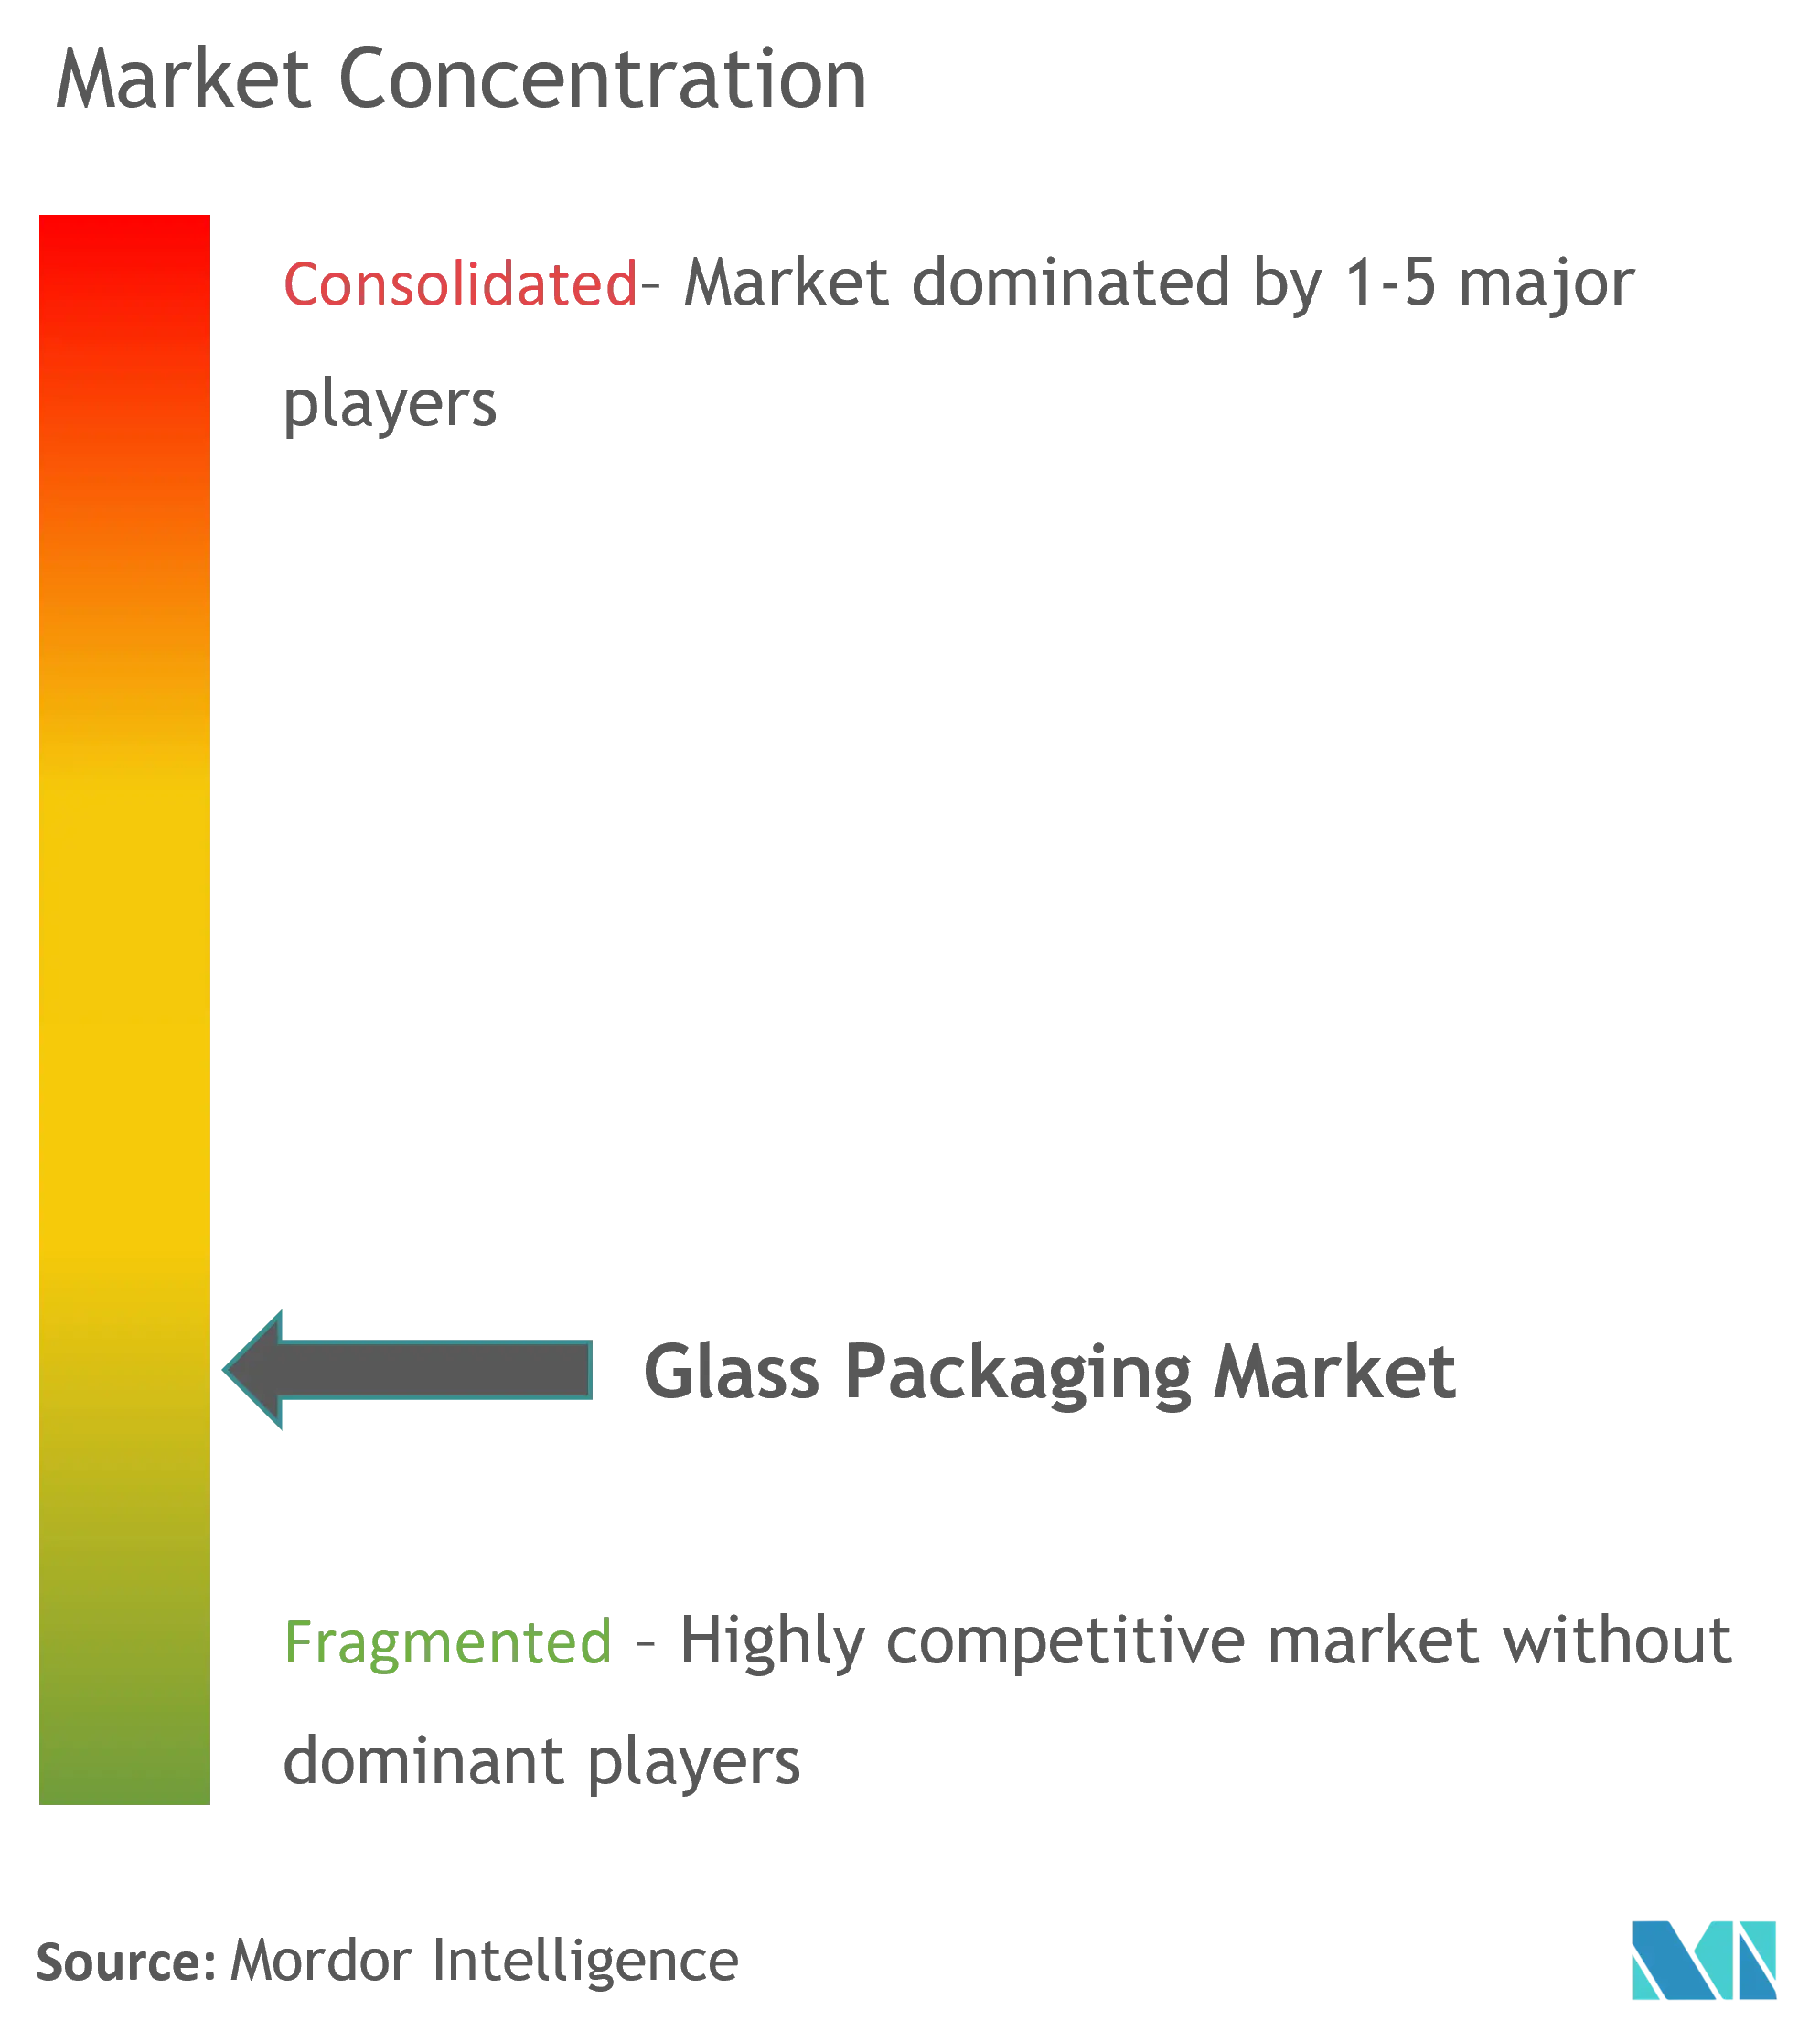 Glass Packaging Market Concentration